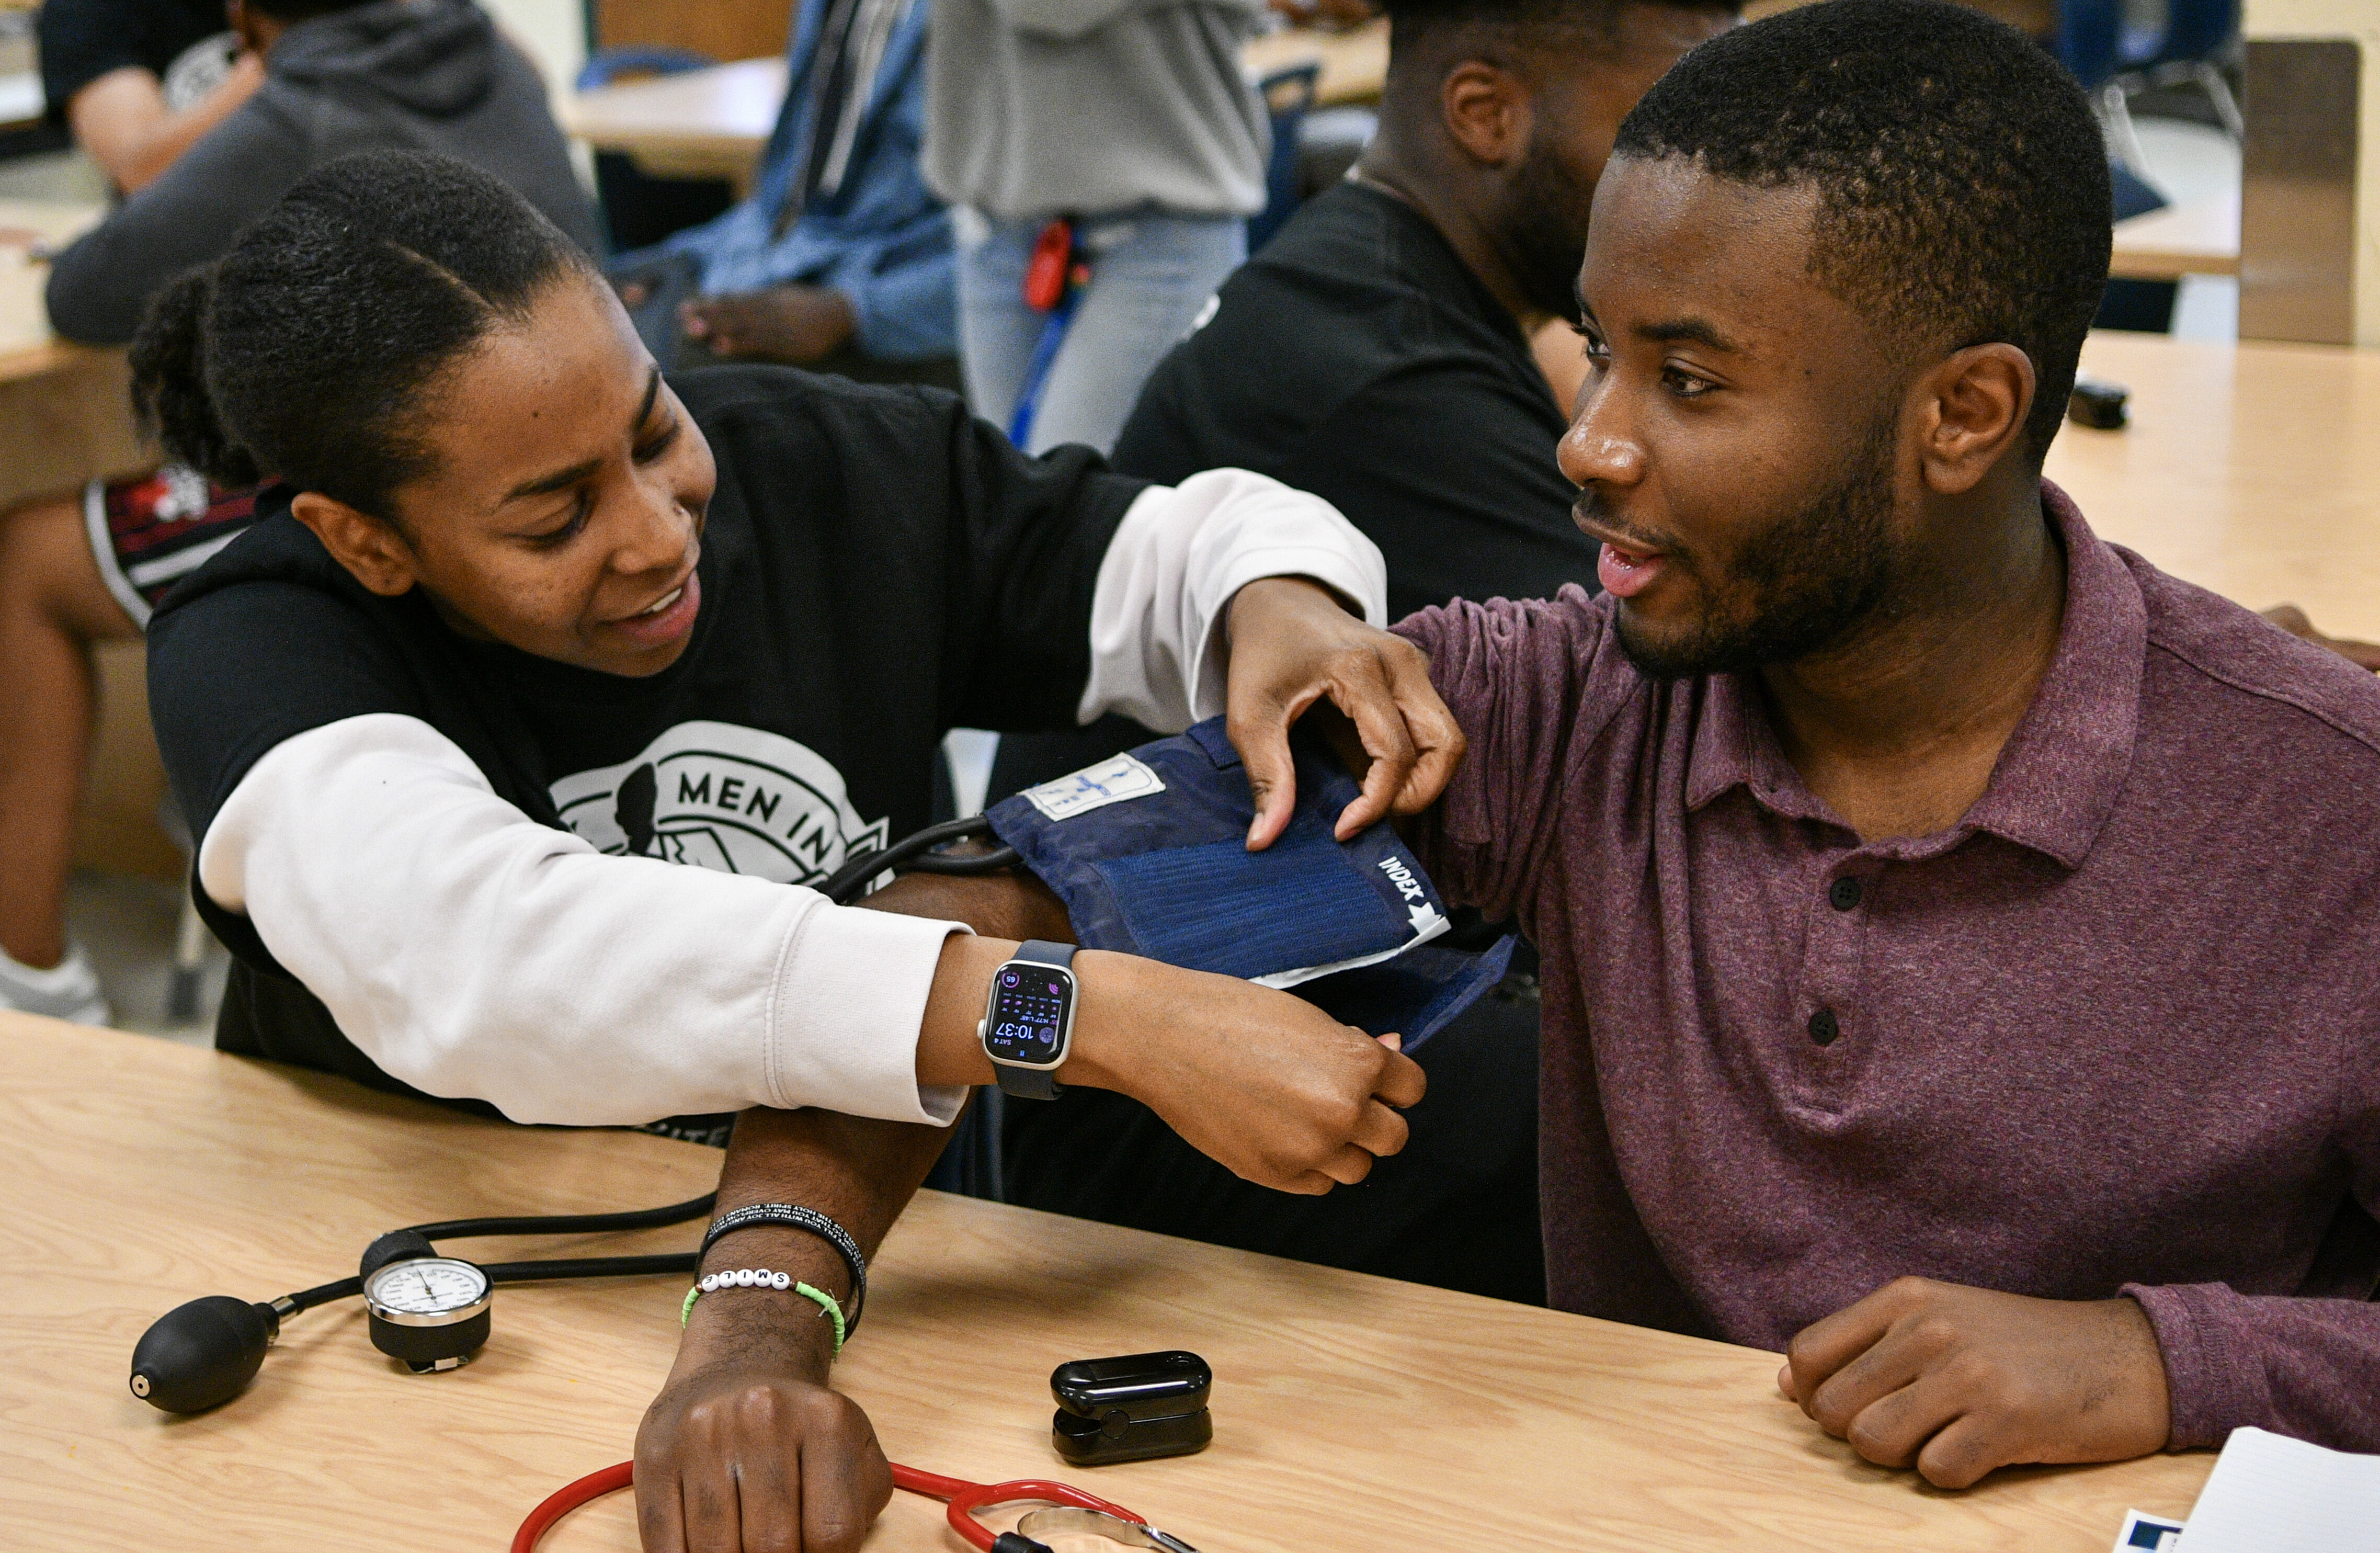 A student practices putting a blood pressure cuff on another student.